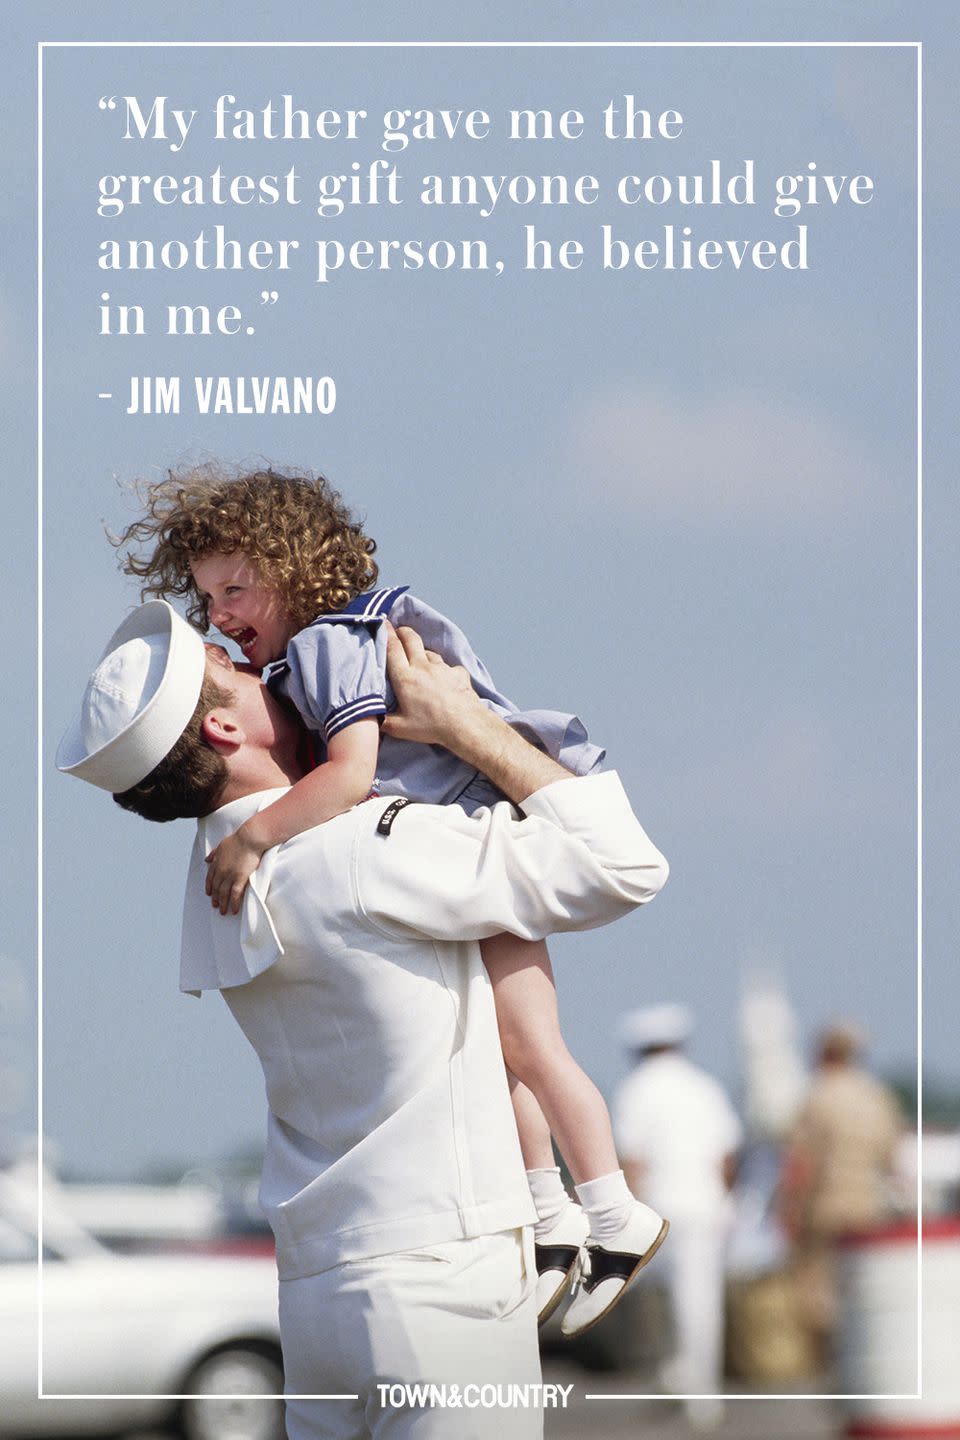 <p>"My father gave me the greatest gift anyone could give another person, he believed in me."</p><p>- Jim Valvano</p>